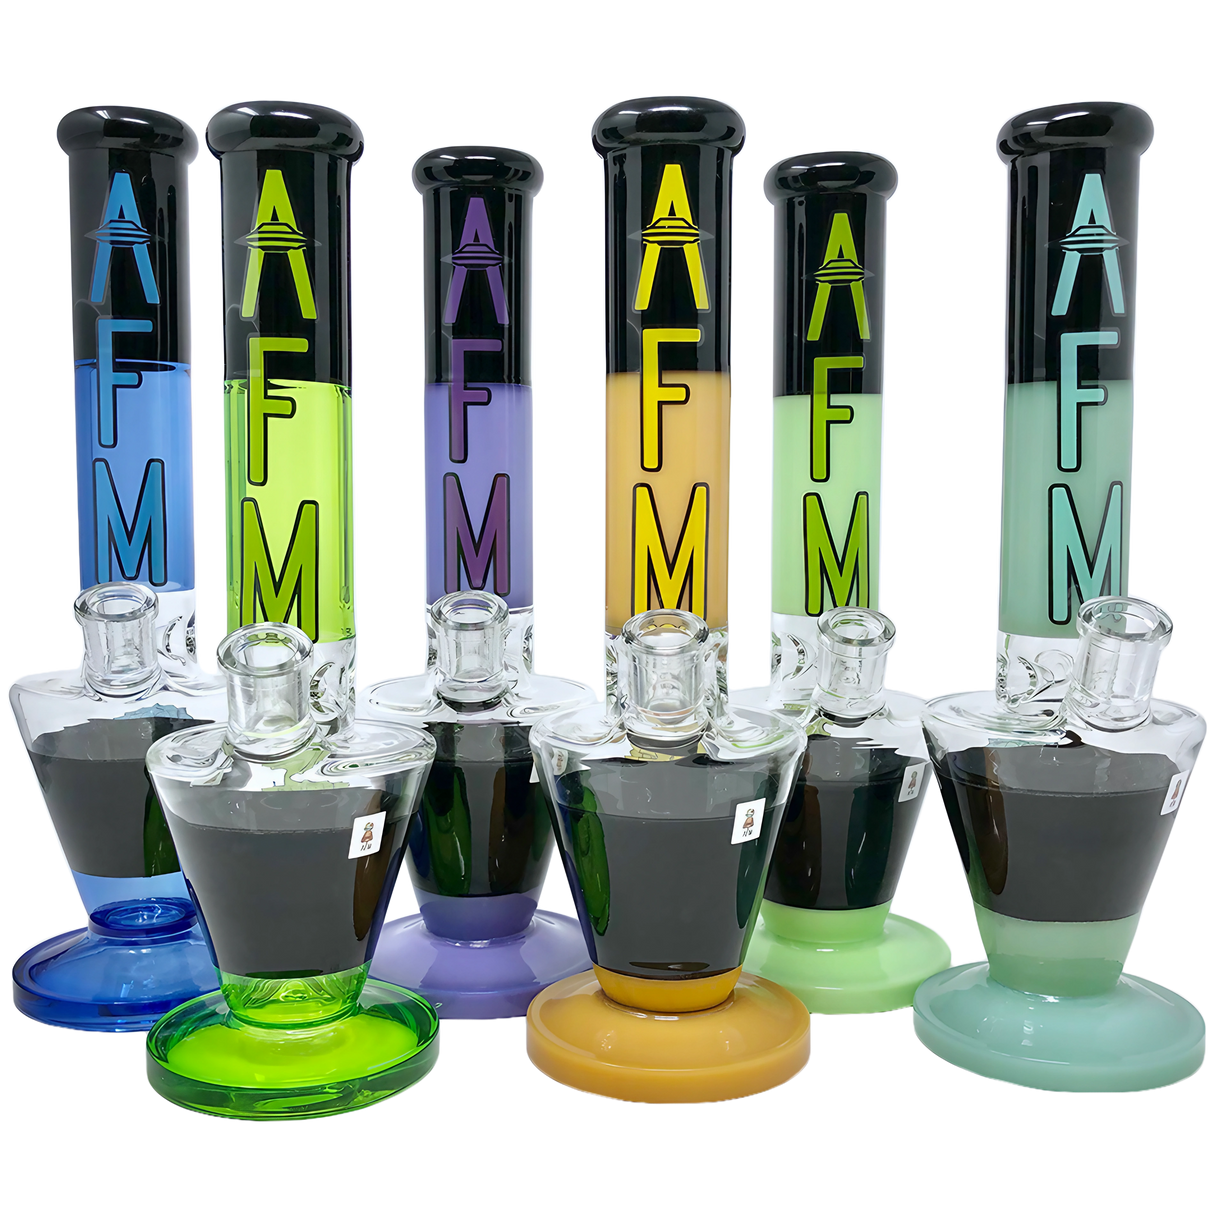 AFM Upsidedown Beaker Zebra Bongs in various colors, 18" tall, for dry herbs, front view